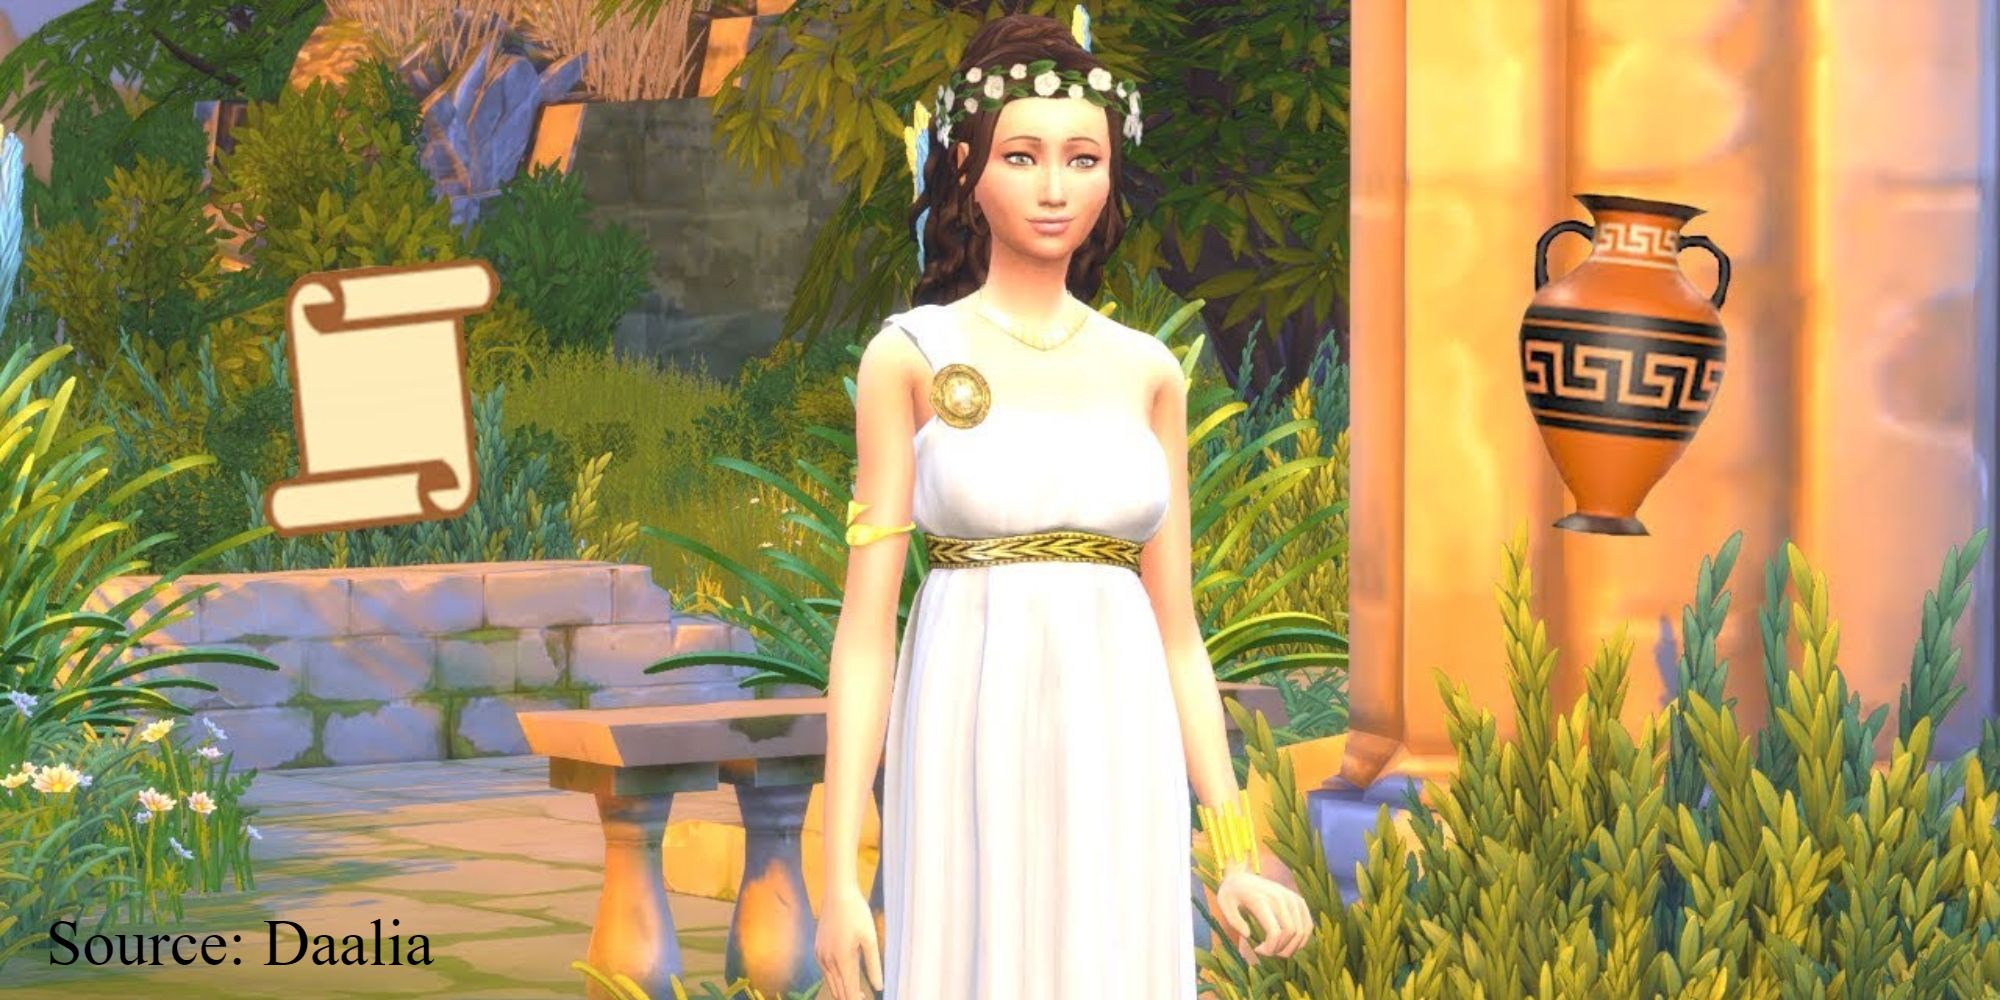 A Sim in a Greek toga and a flower crown made by Daalia